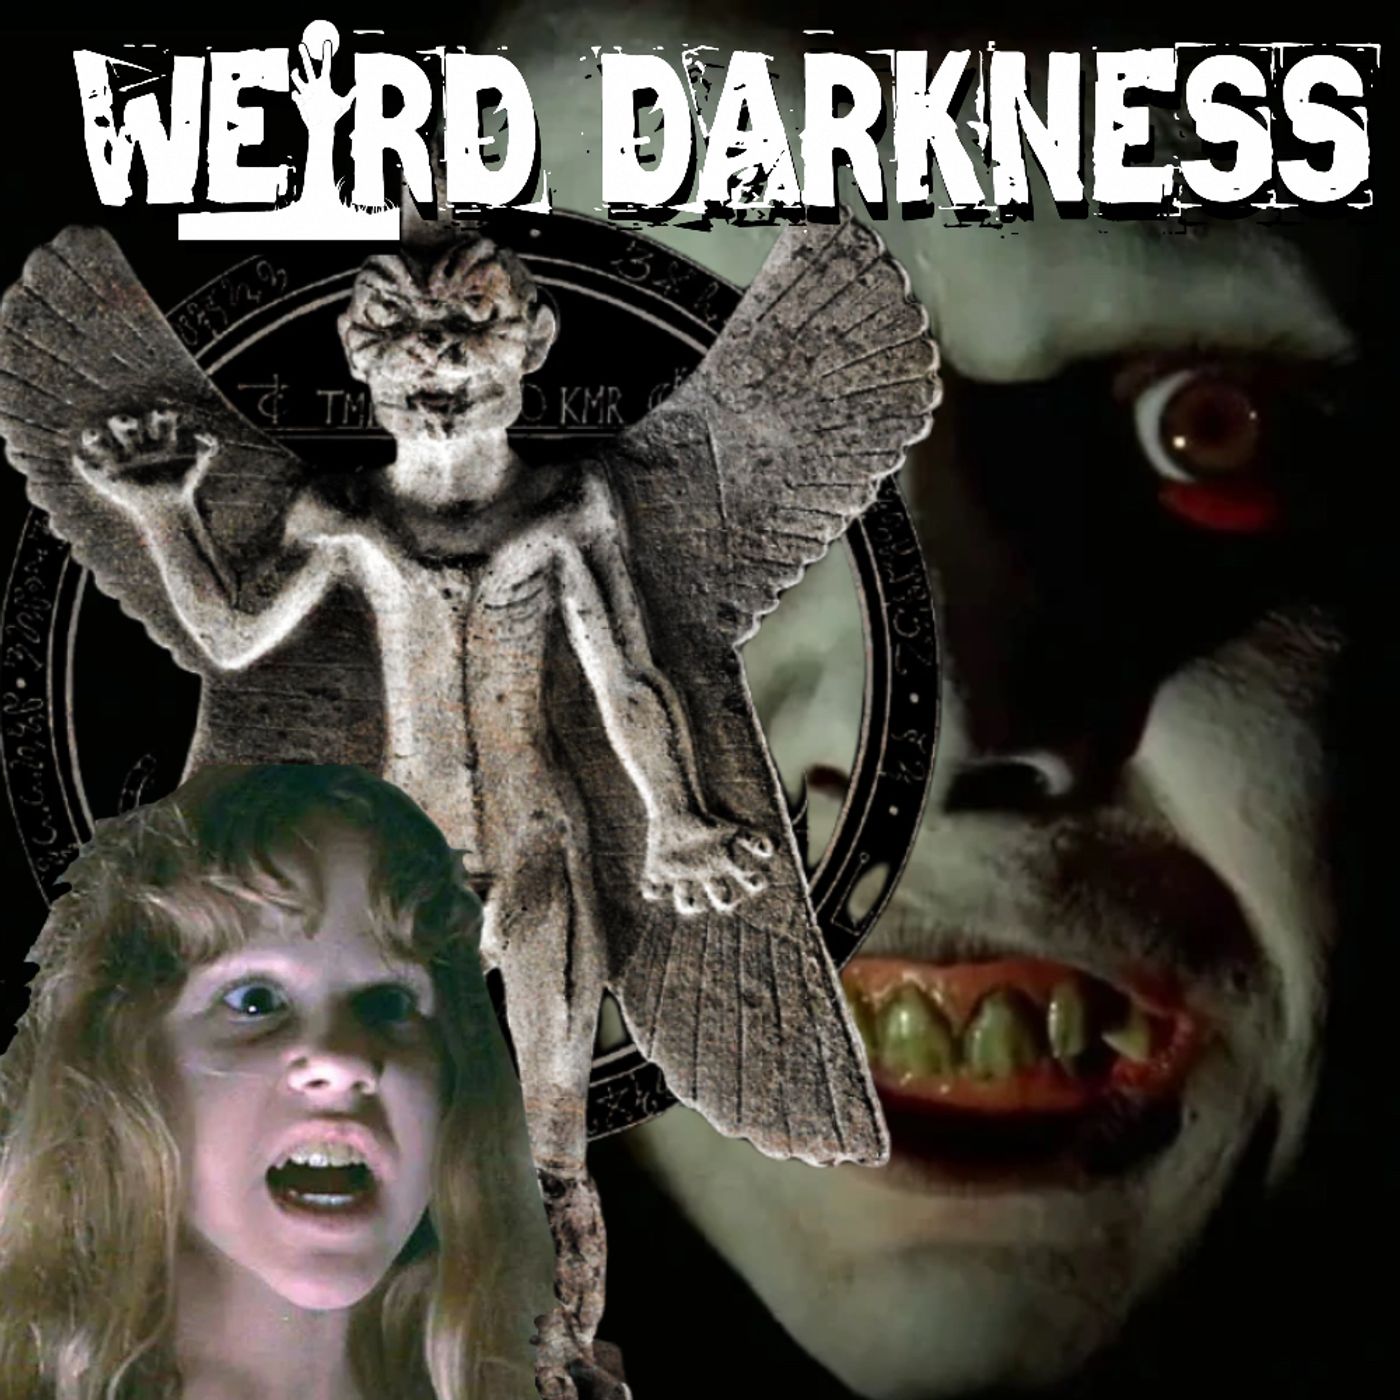 “PAZUZU, THE DEMON ‘THE EXORCIST’ MADE FAMOUS” and More True Stories! #WeirdDarkness